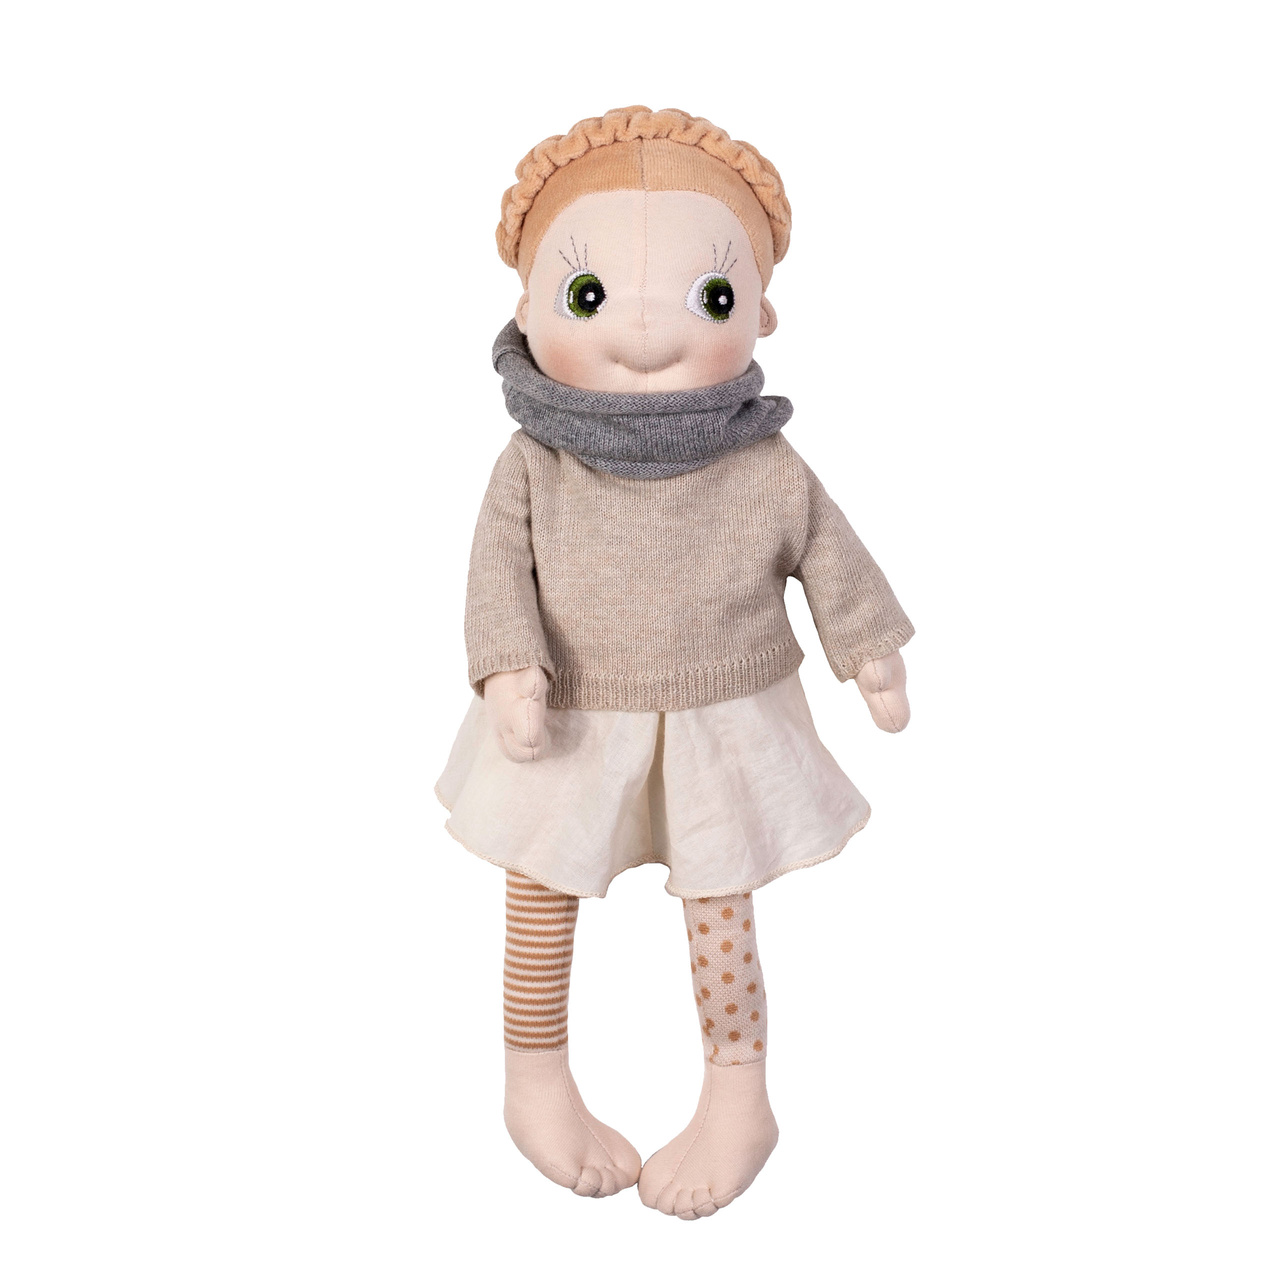 Doll clothes rubens barn doll clothes winter set ecobuds